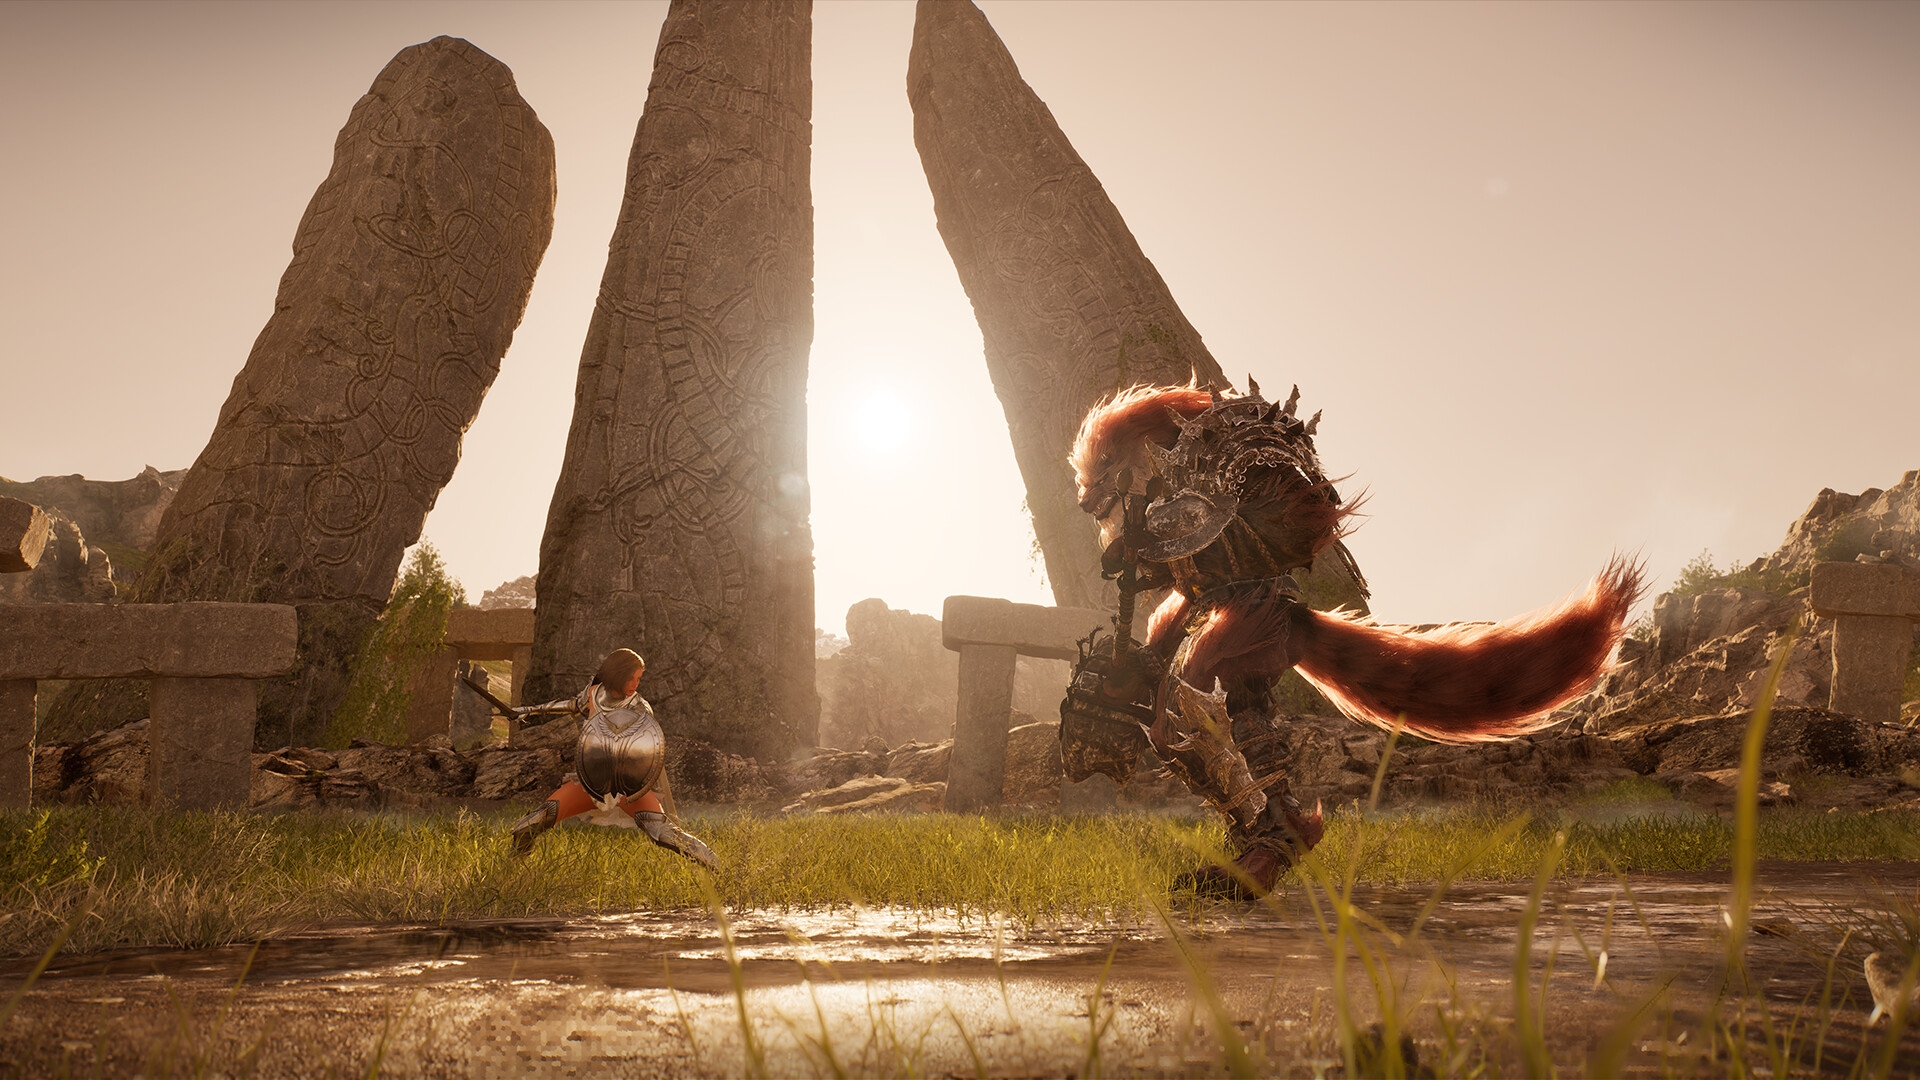 Nexon has announced Vindictus: Defying Fate - an Action RPG inspired by Celtic mythology